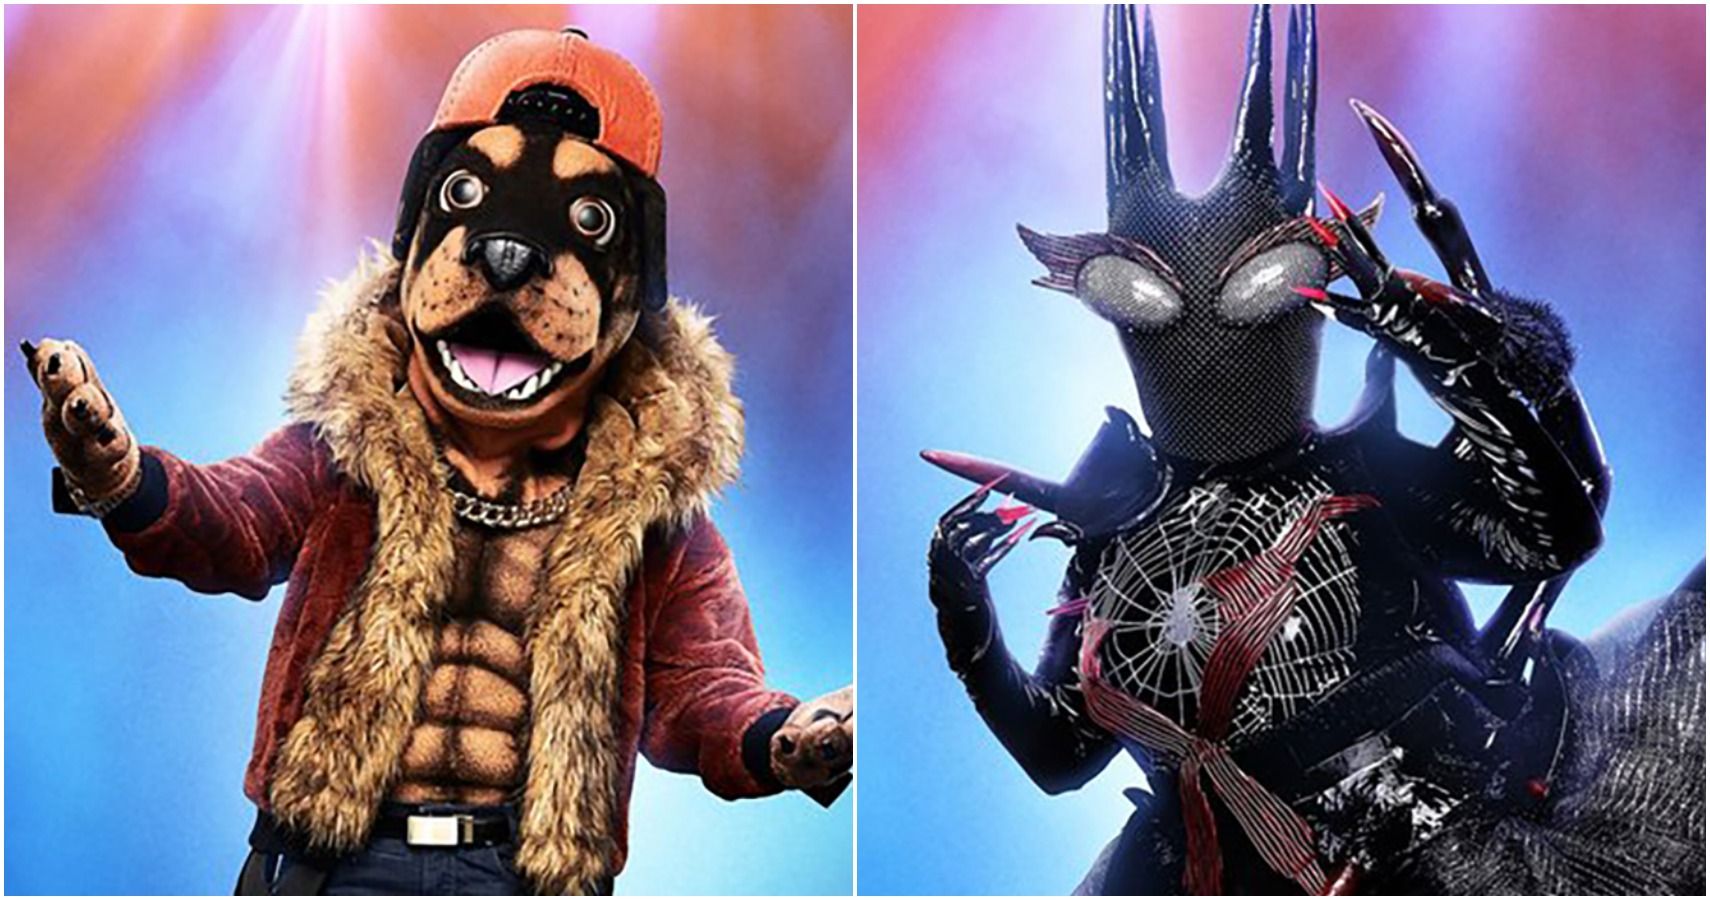 The 10 Best Performers On The Masked Singer (Both Seasons), Ranked